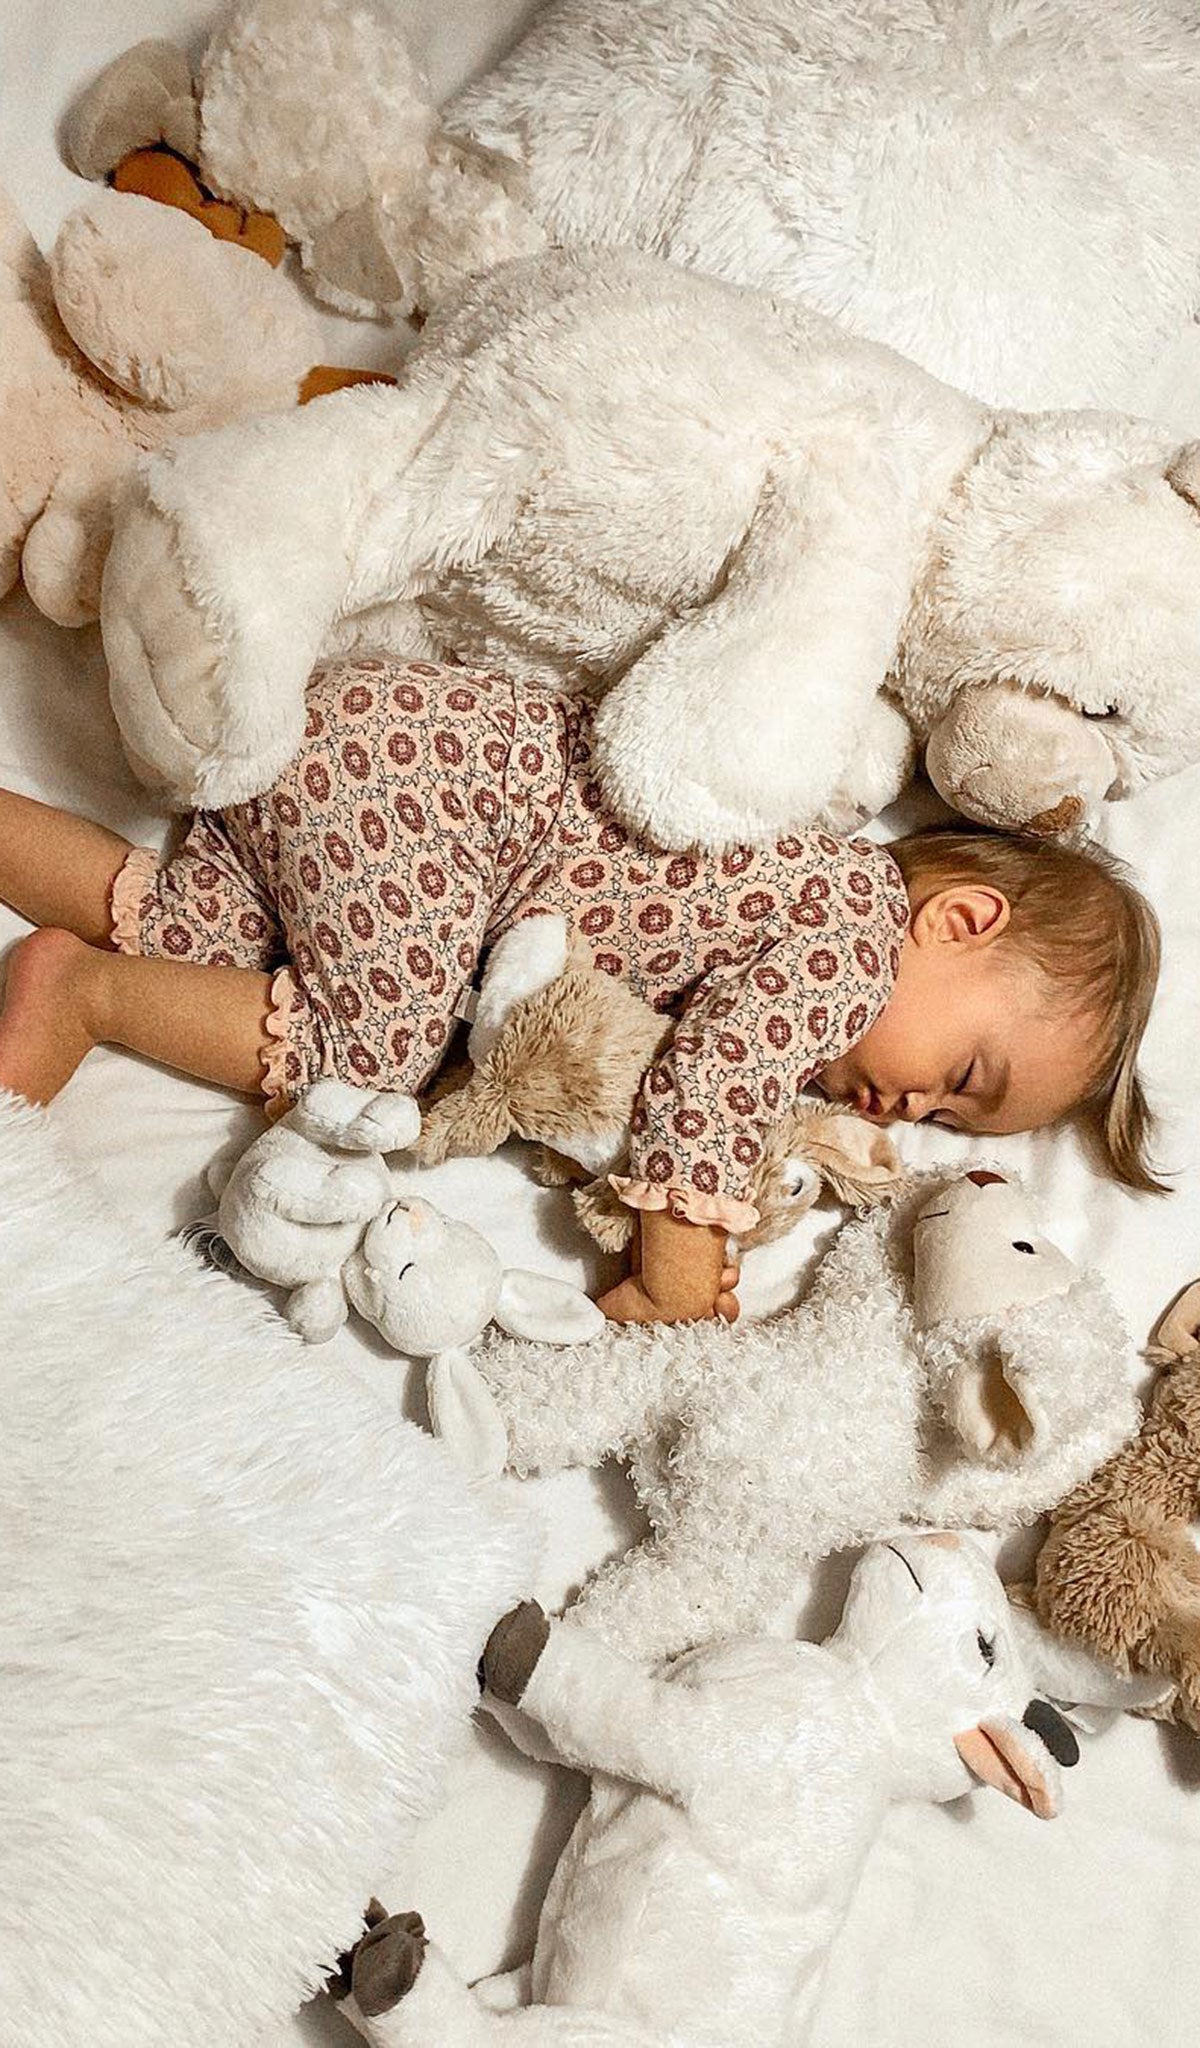 Baby's Ruffle Take-Me-Home 3 Piece - Pink Blush worn by sleeping baby next to several stuffed animals.